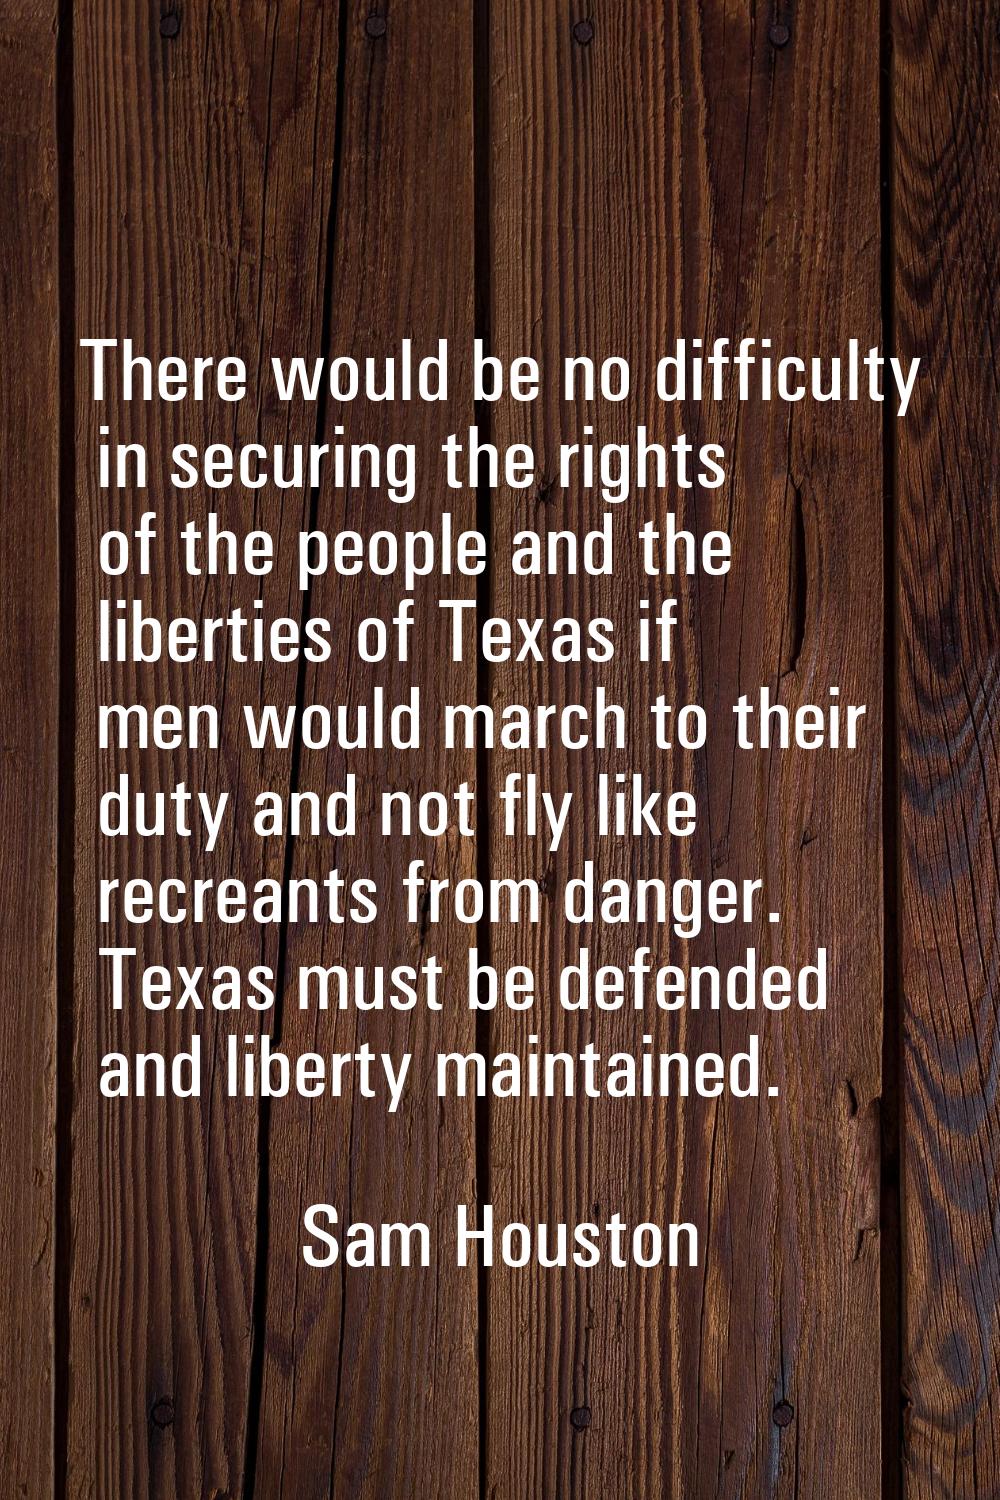 There would be no difficulty in securing the rights of the people and the liberties of Texas if men